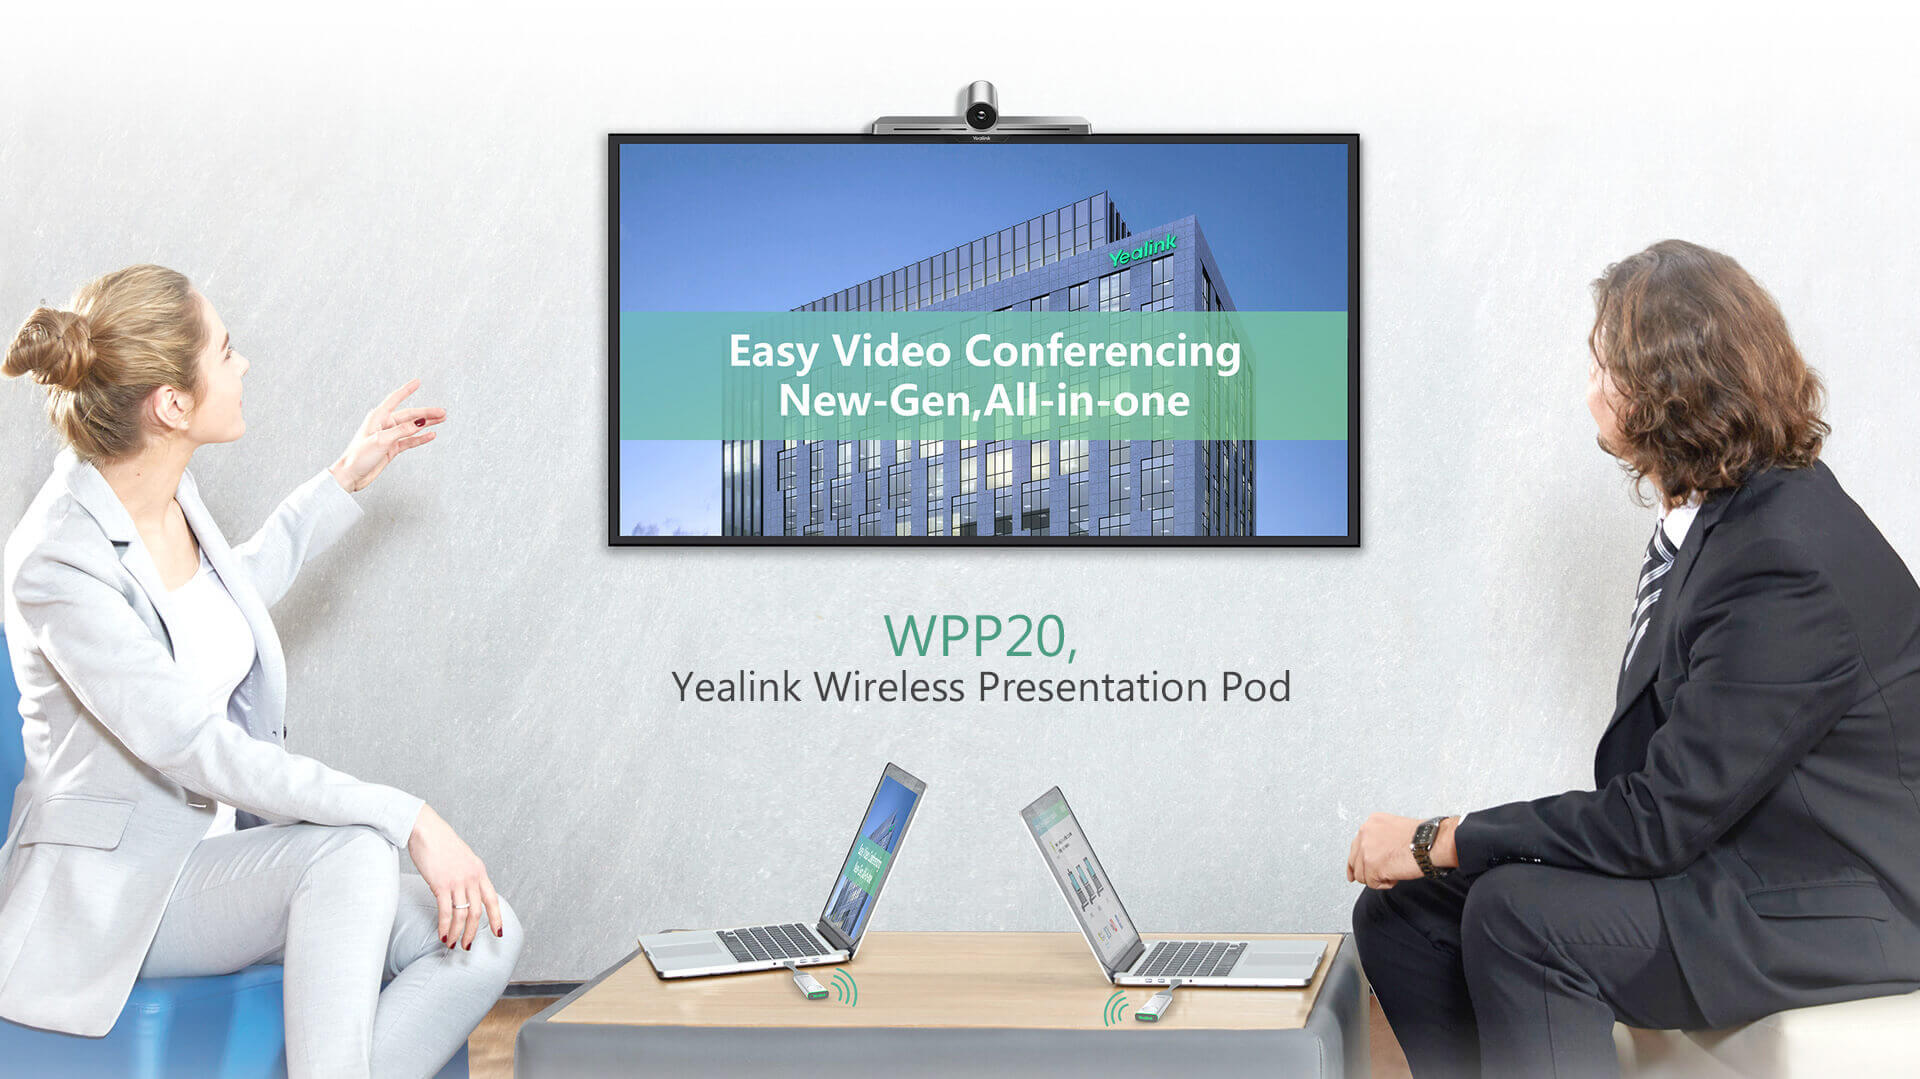 Yealink WPP20 Dual-Band WiFi 5 Presentation Pod VoIP Phone Accessory